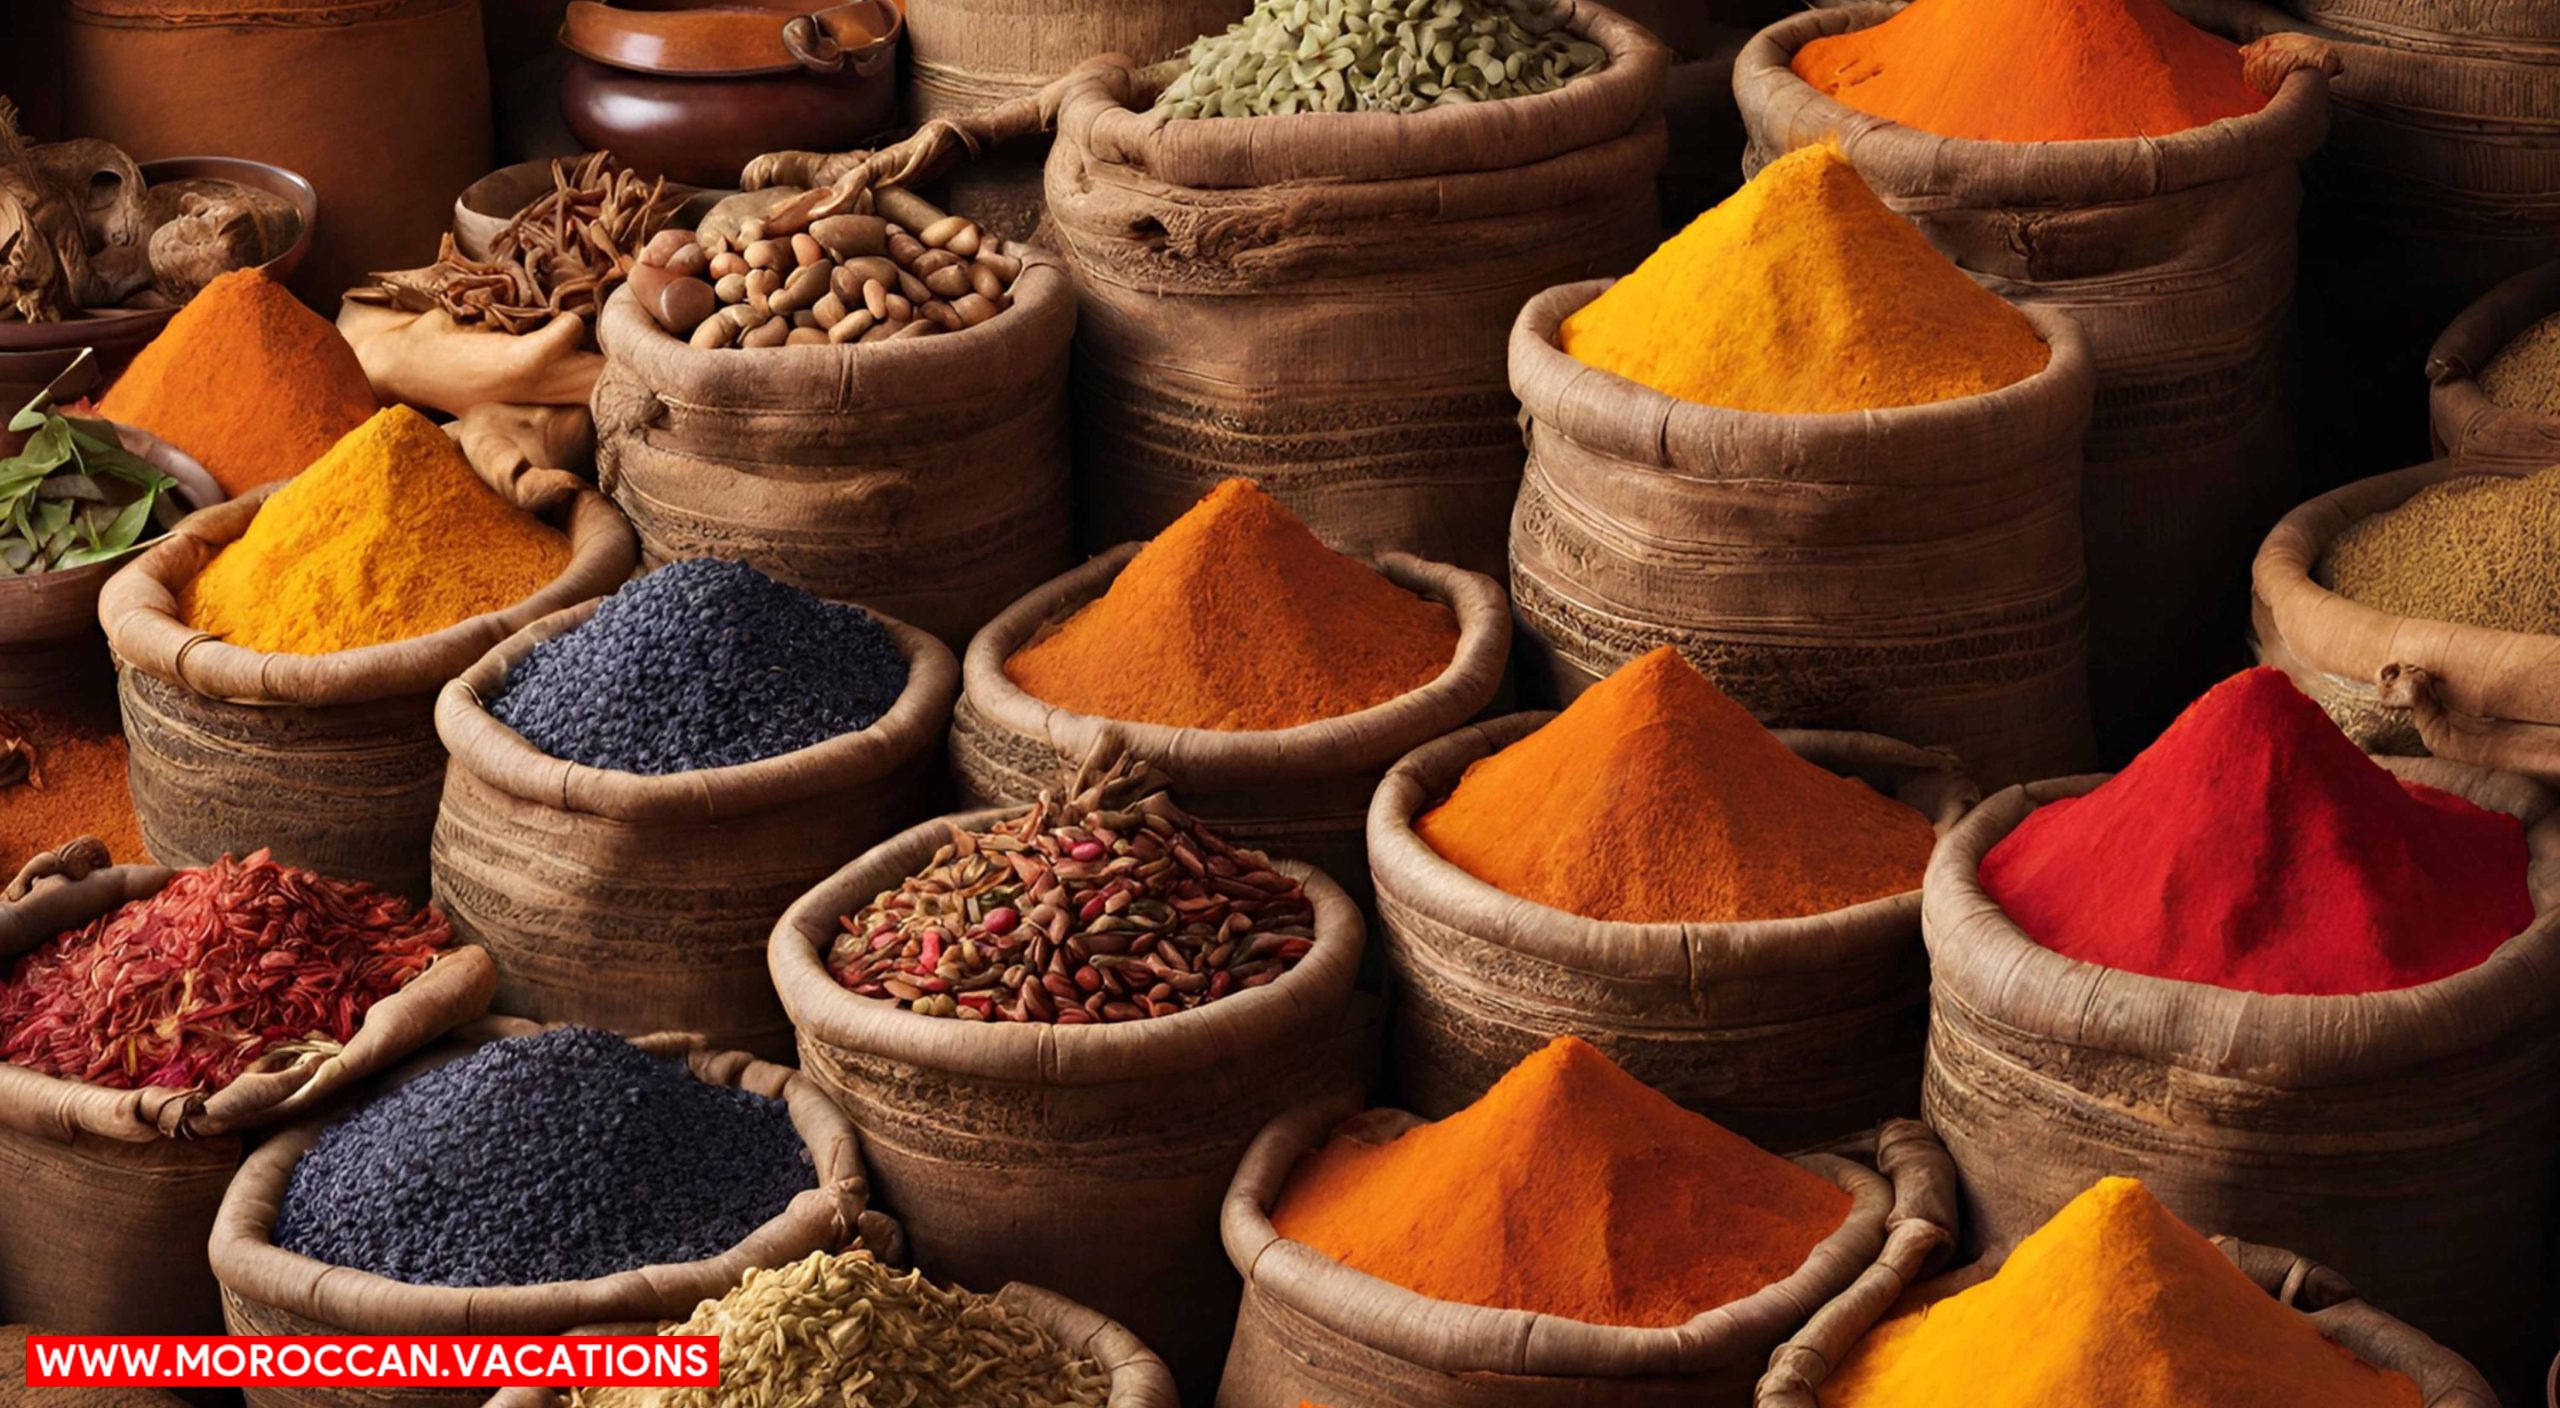 Moroccan spice bazaar, featuring a variety of exotic spices and aromatic herbs.